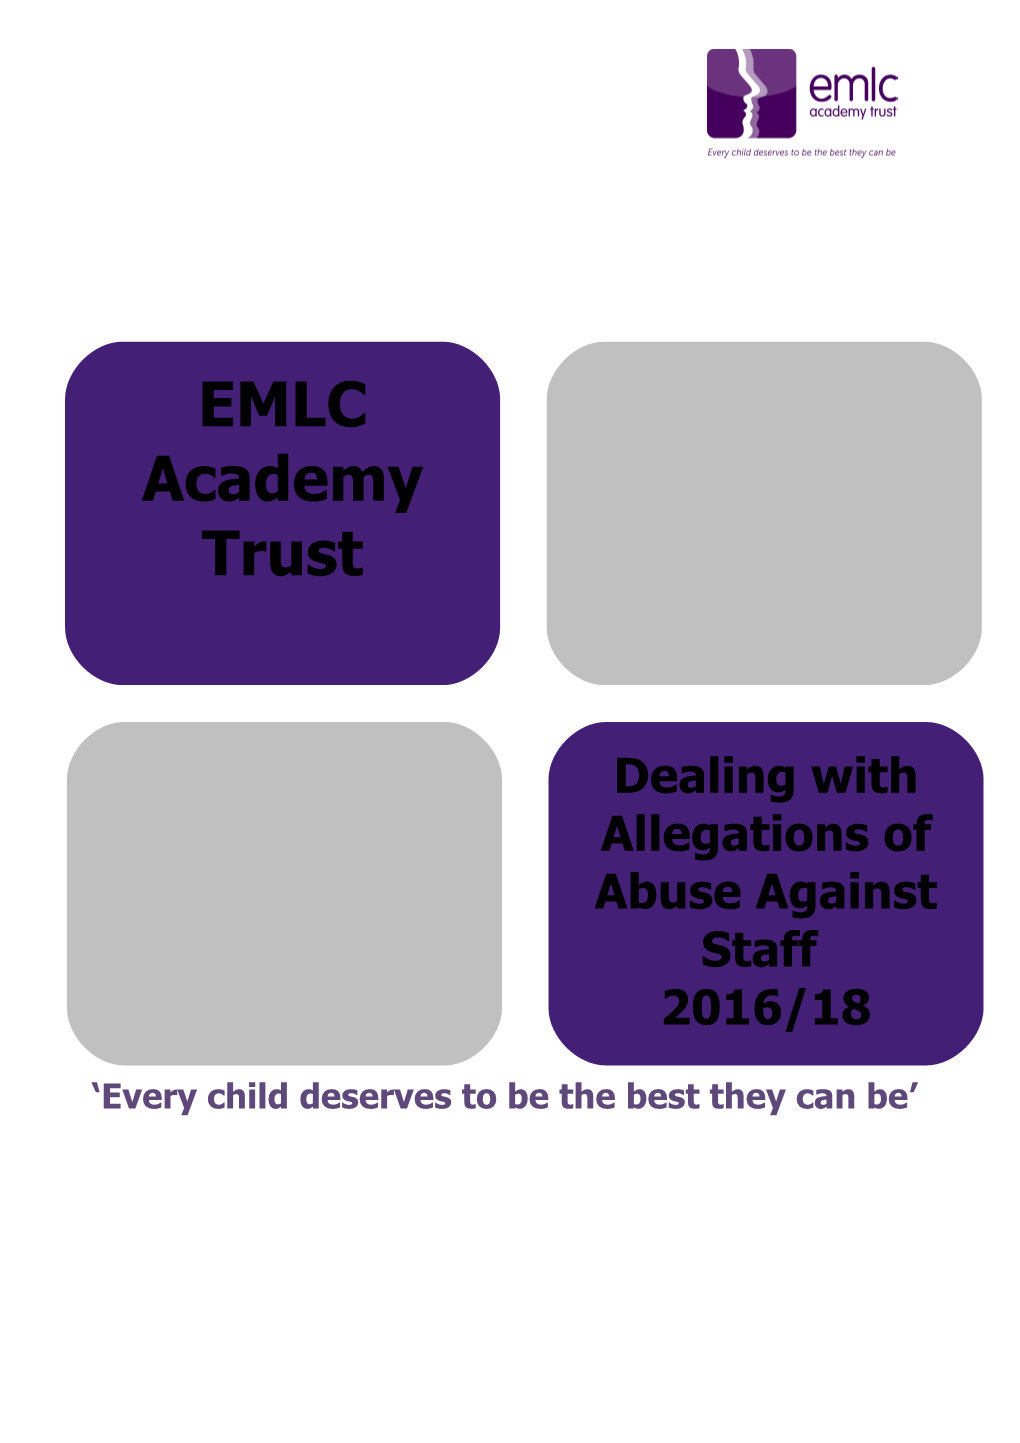 1.1.The Purpose of EMLC Academy Trust Sdealing with Allegations of Abuse Against Staff